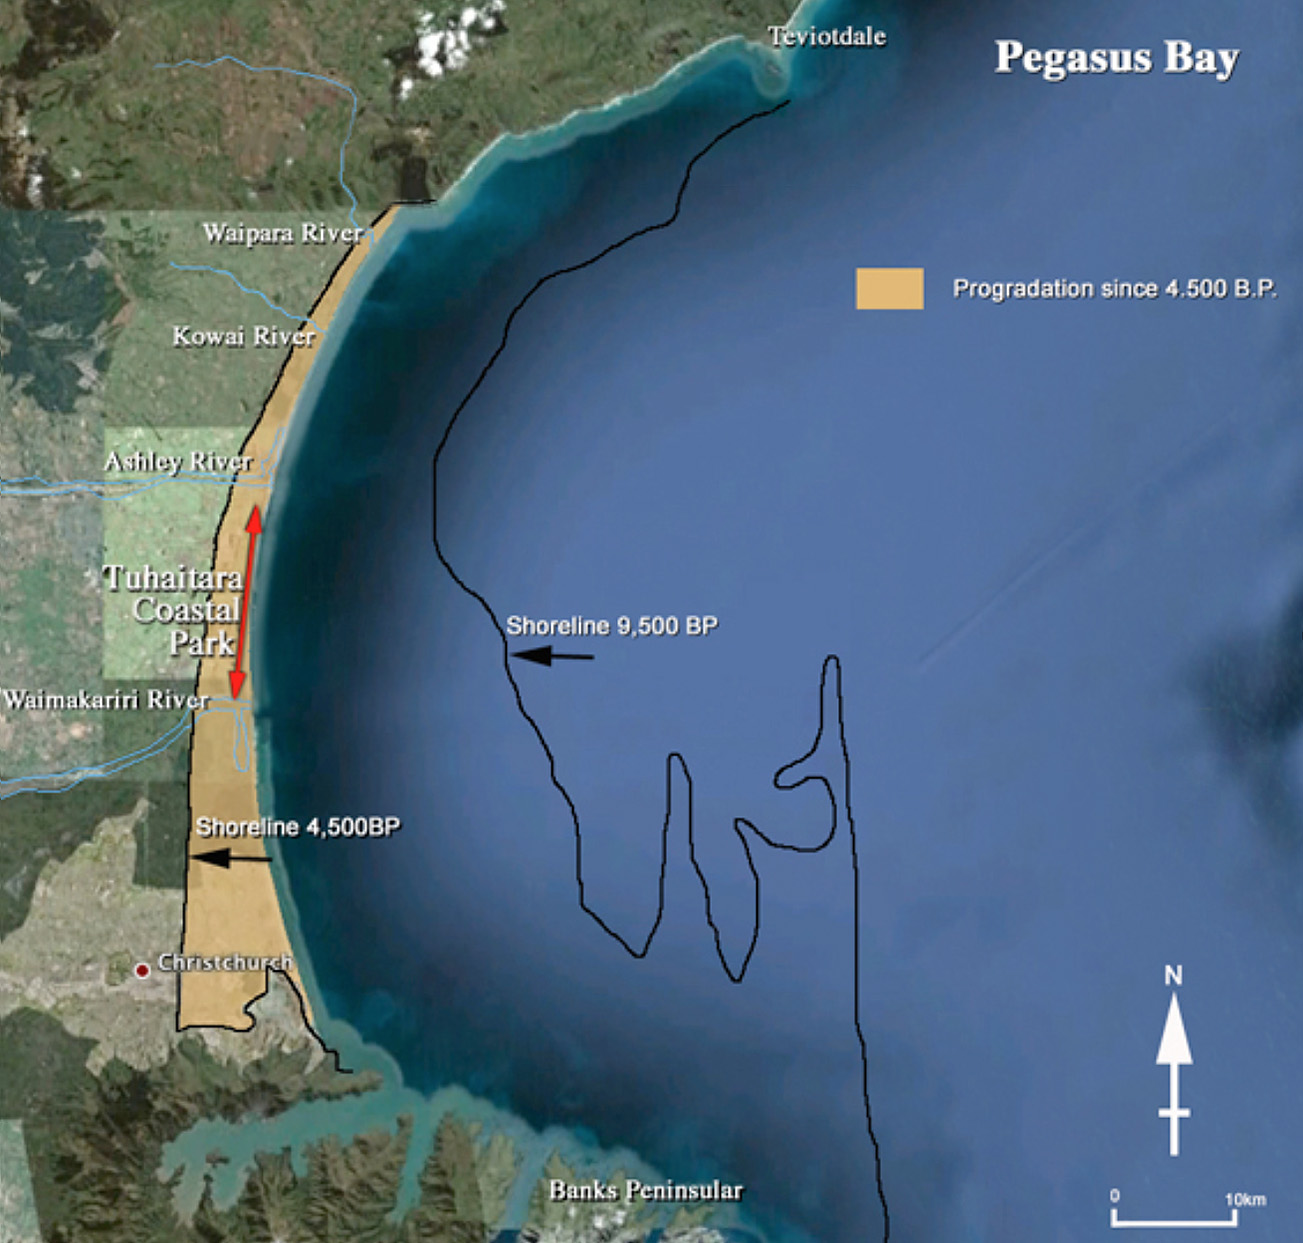 Fig. 3: The changing coastline of Pegasus Bay: 9,500 years ago ('before present' or 'BP'), the shoreline was much further out to sea. Between 9,500-4,500 years ago the coast was drowned as eustatic sea levels rose. By 4,500 year ago, the climate and with it global sea levels were stable. Subsequently, sediment, mostly from the Waimakariri River, built the coastline outwards (mustard-coloured area of 'progradation'). (Image: Whitelaw).